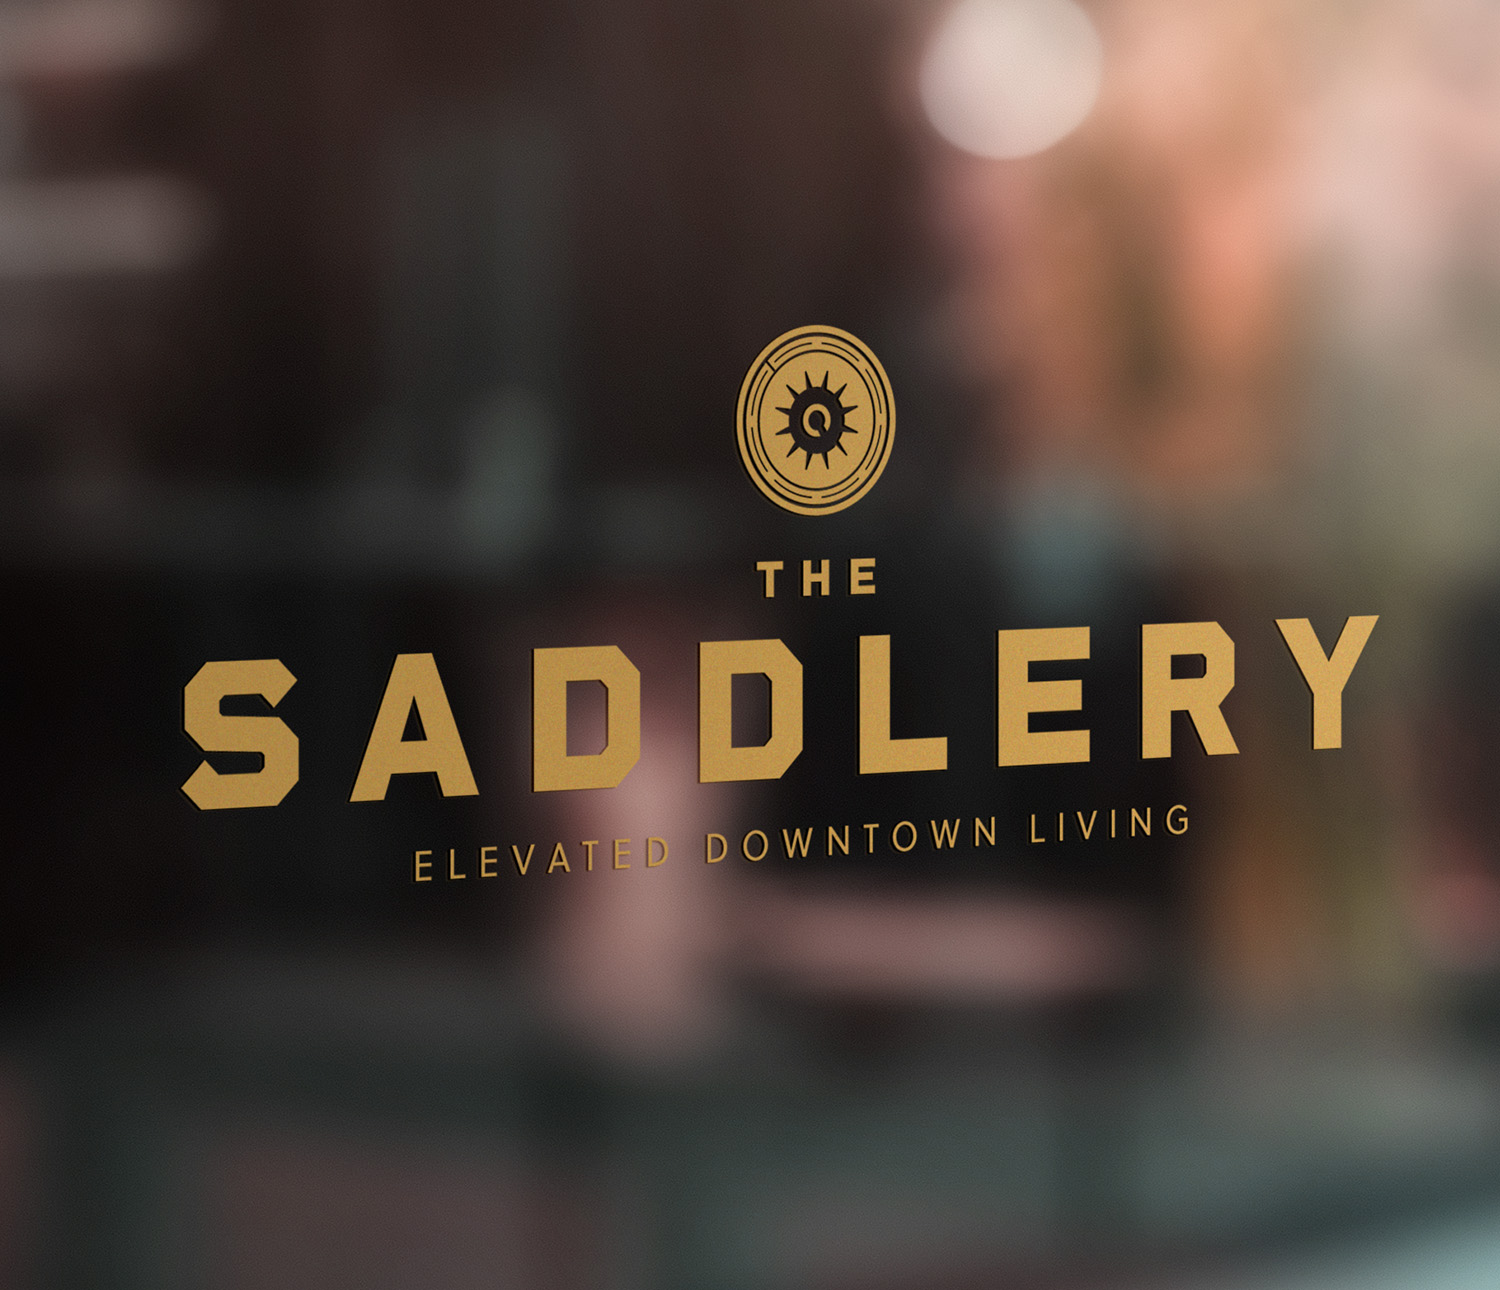 On a glass door reads The Saddlery, Elevated Downtown Living